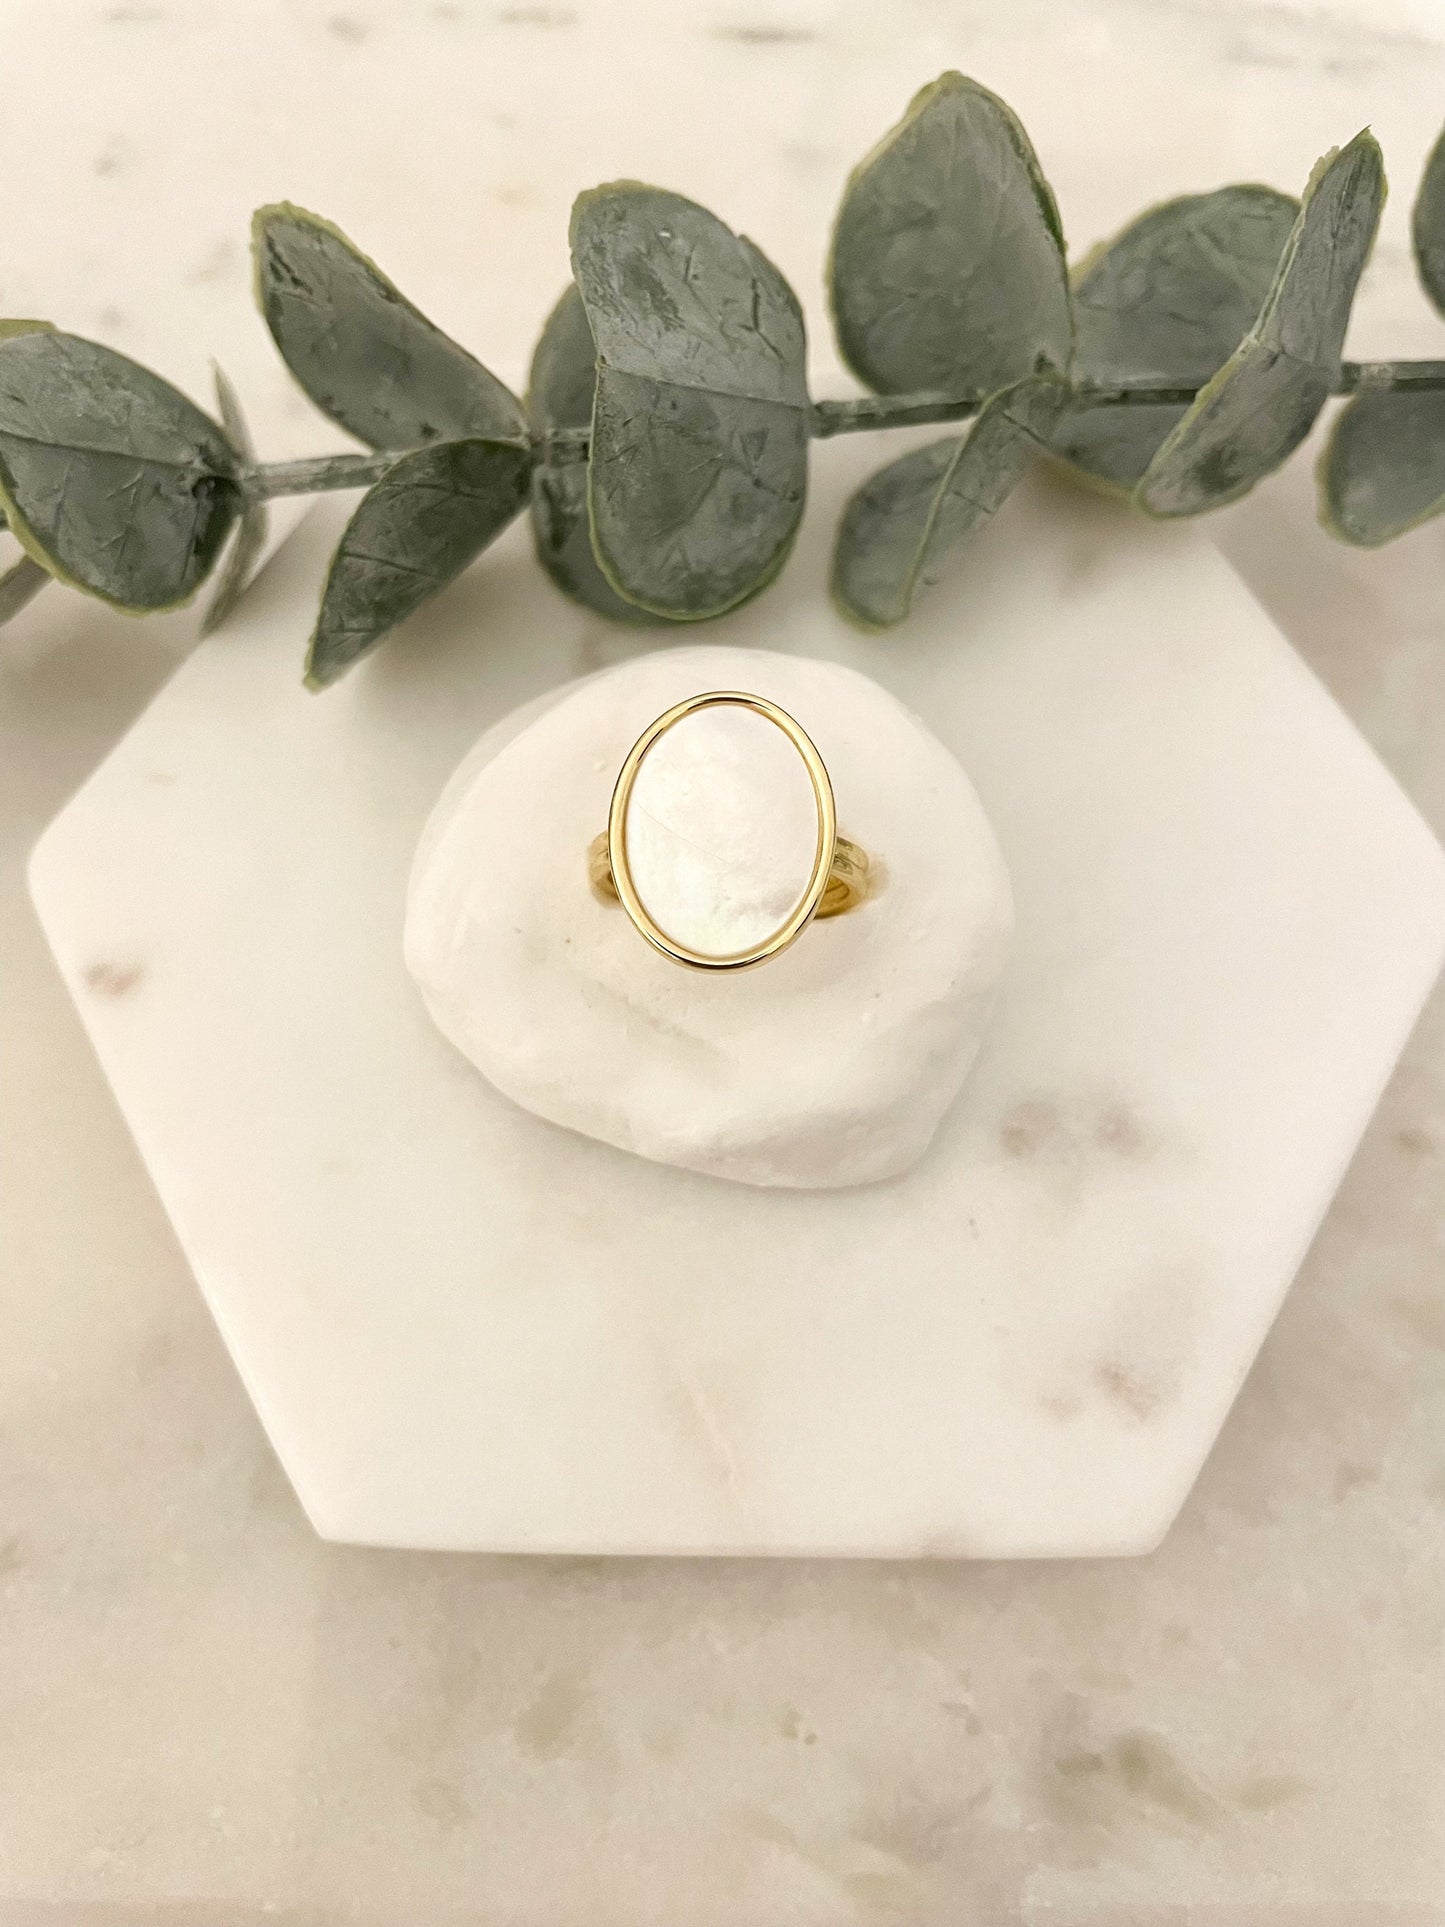 Gold & White Mother of Pearl Statement Ring - Bar or Oval Ring